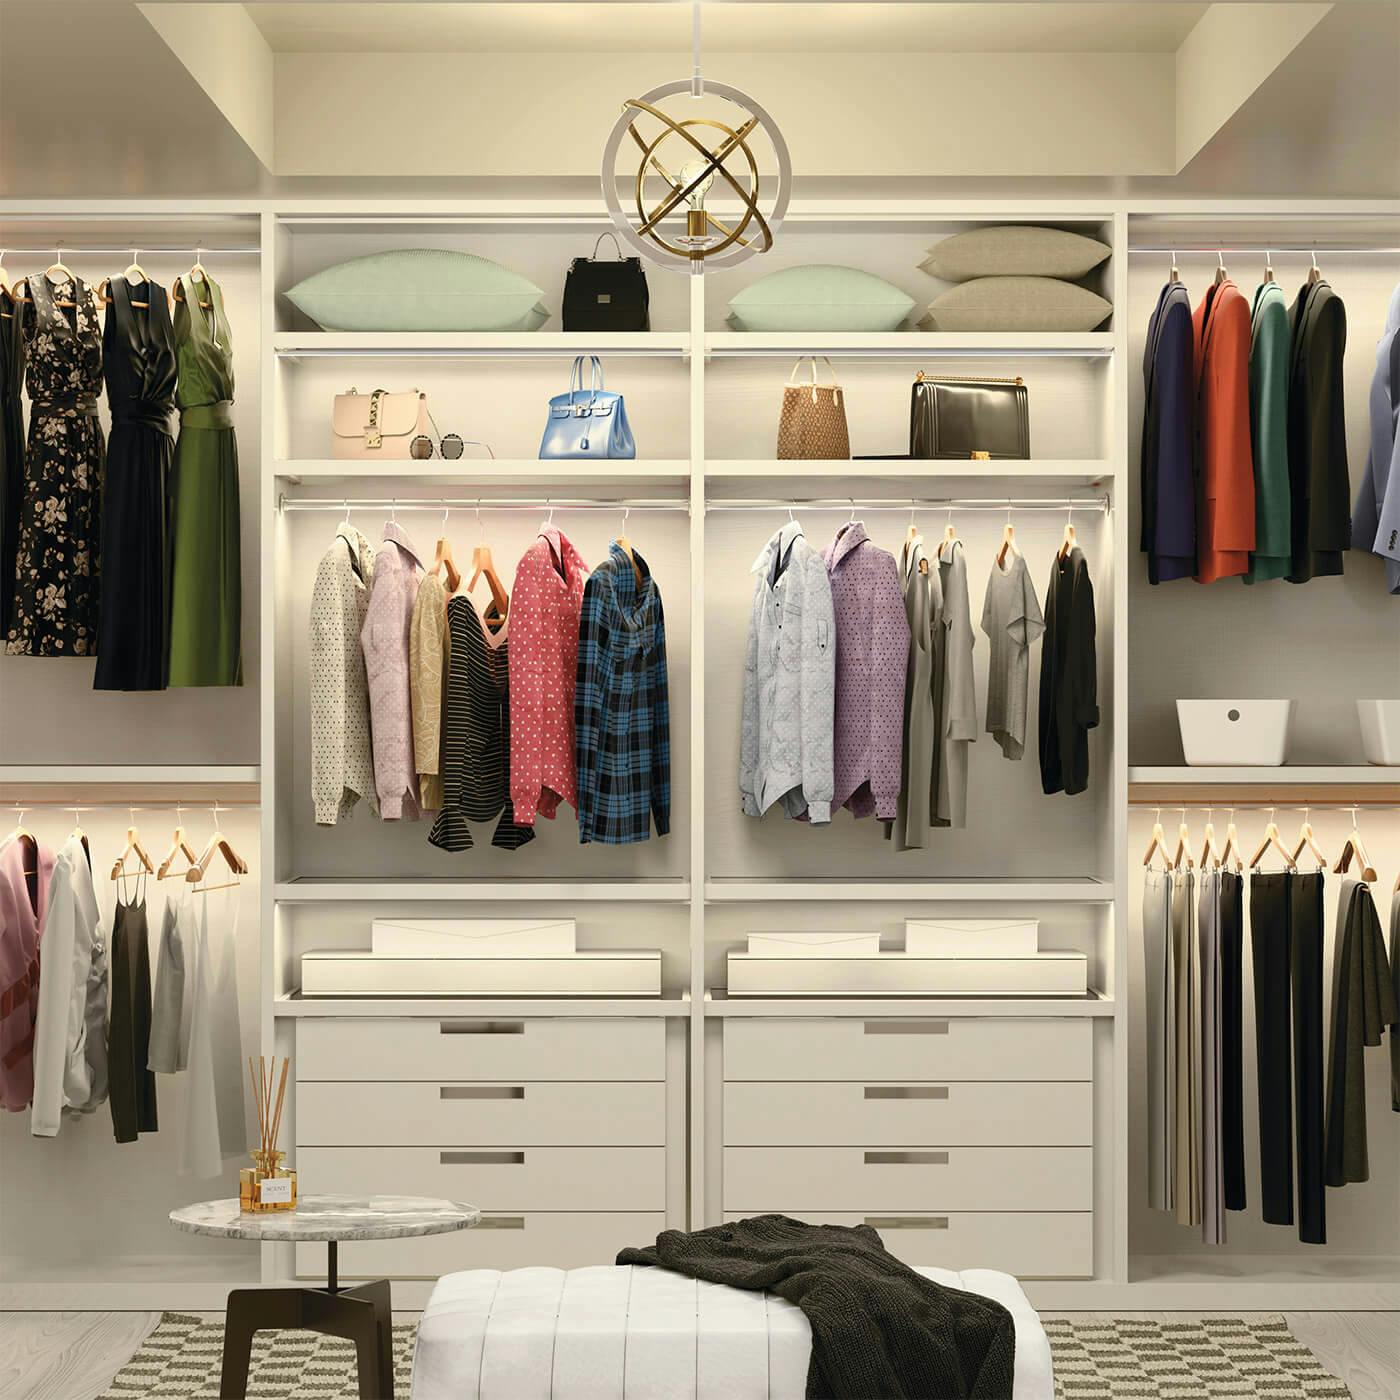 Closet featuring both a mini chandelier and downlights that are lit